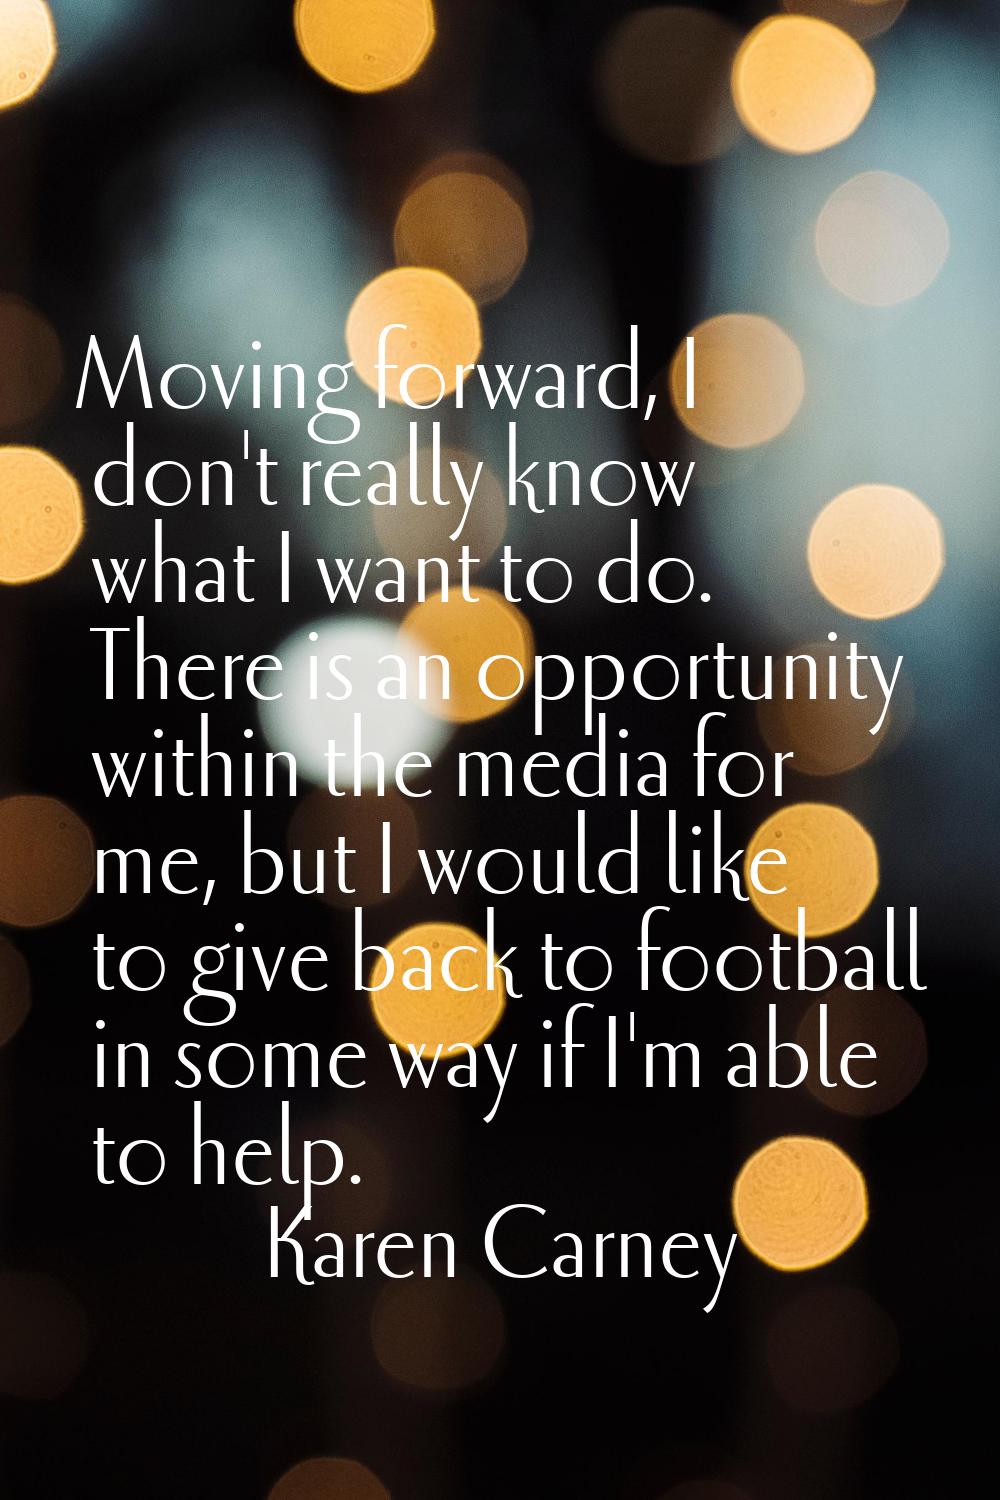 Moving forward, I don't really know what I want to do. There is an opportunity within the media for